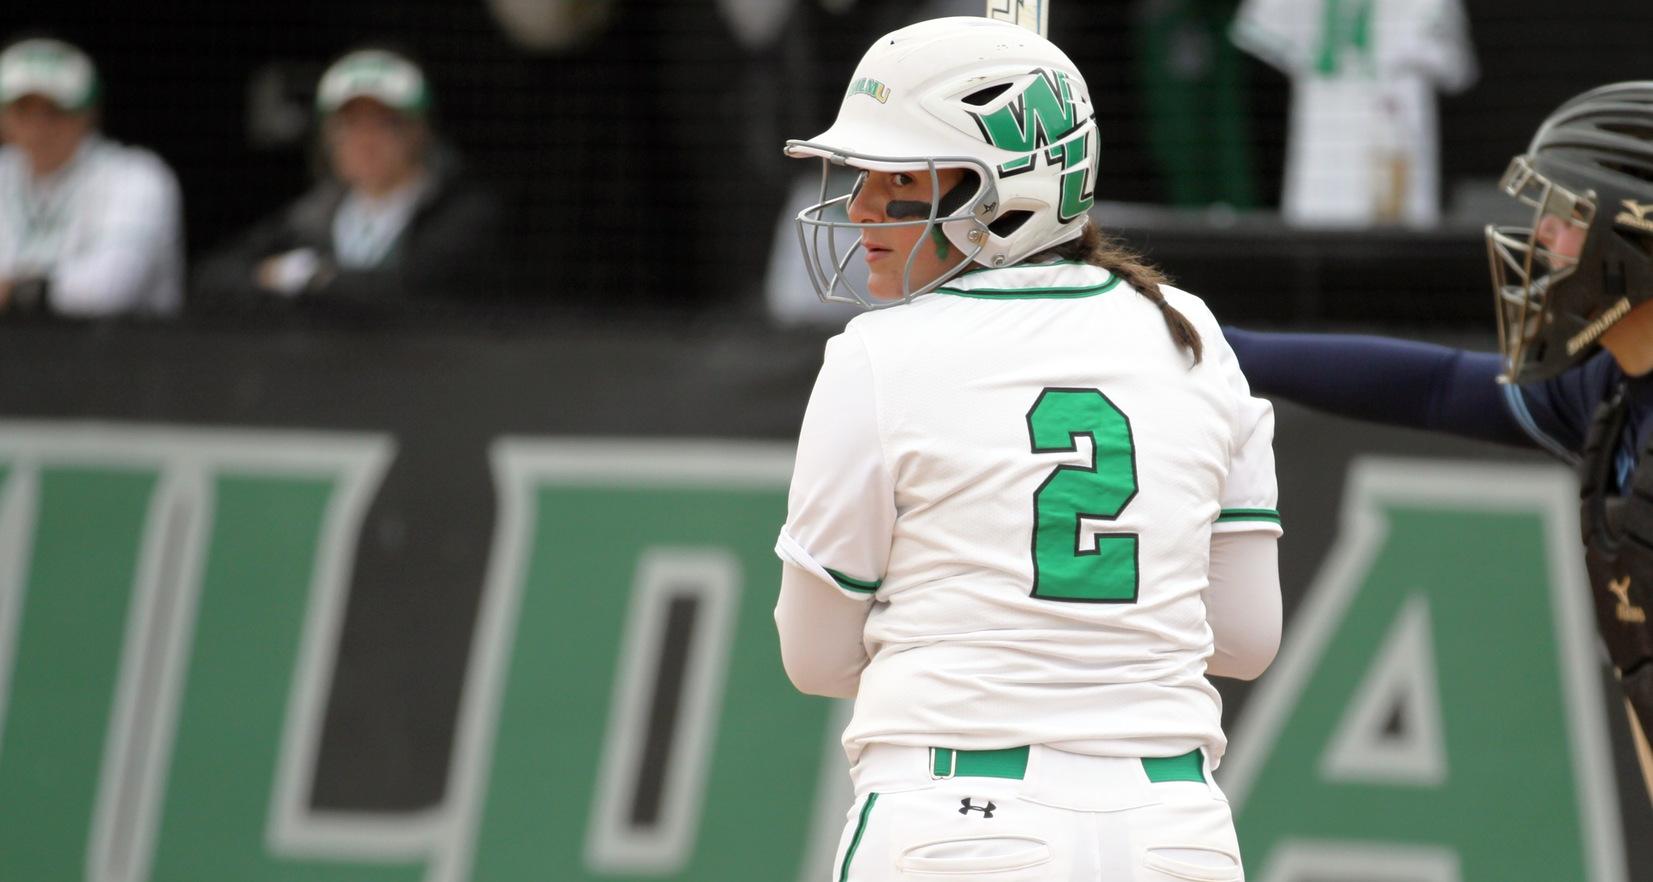 Copyright 2019: Wilmington University. All rights reserved. File photo of Lauren Lopez who broke the single season record for RBI with eight RBI against Dominican, now with 54 on the year. Photo by Katlynne Tubo. April 2, 2019 vs. Jefferson (Game 1).